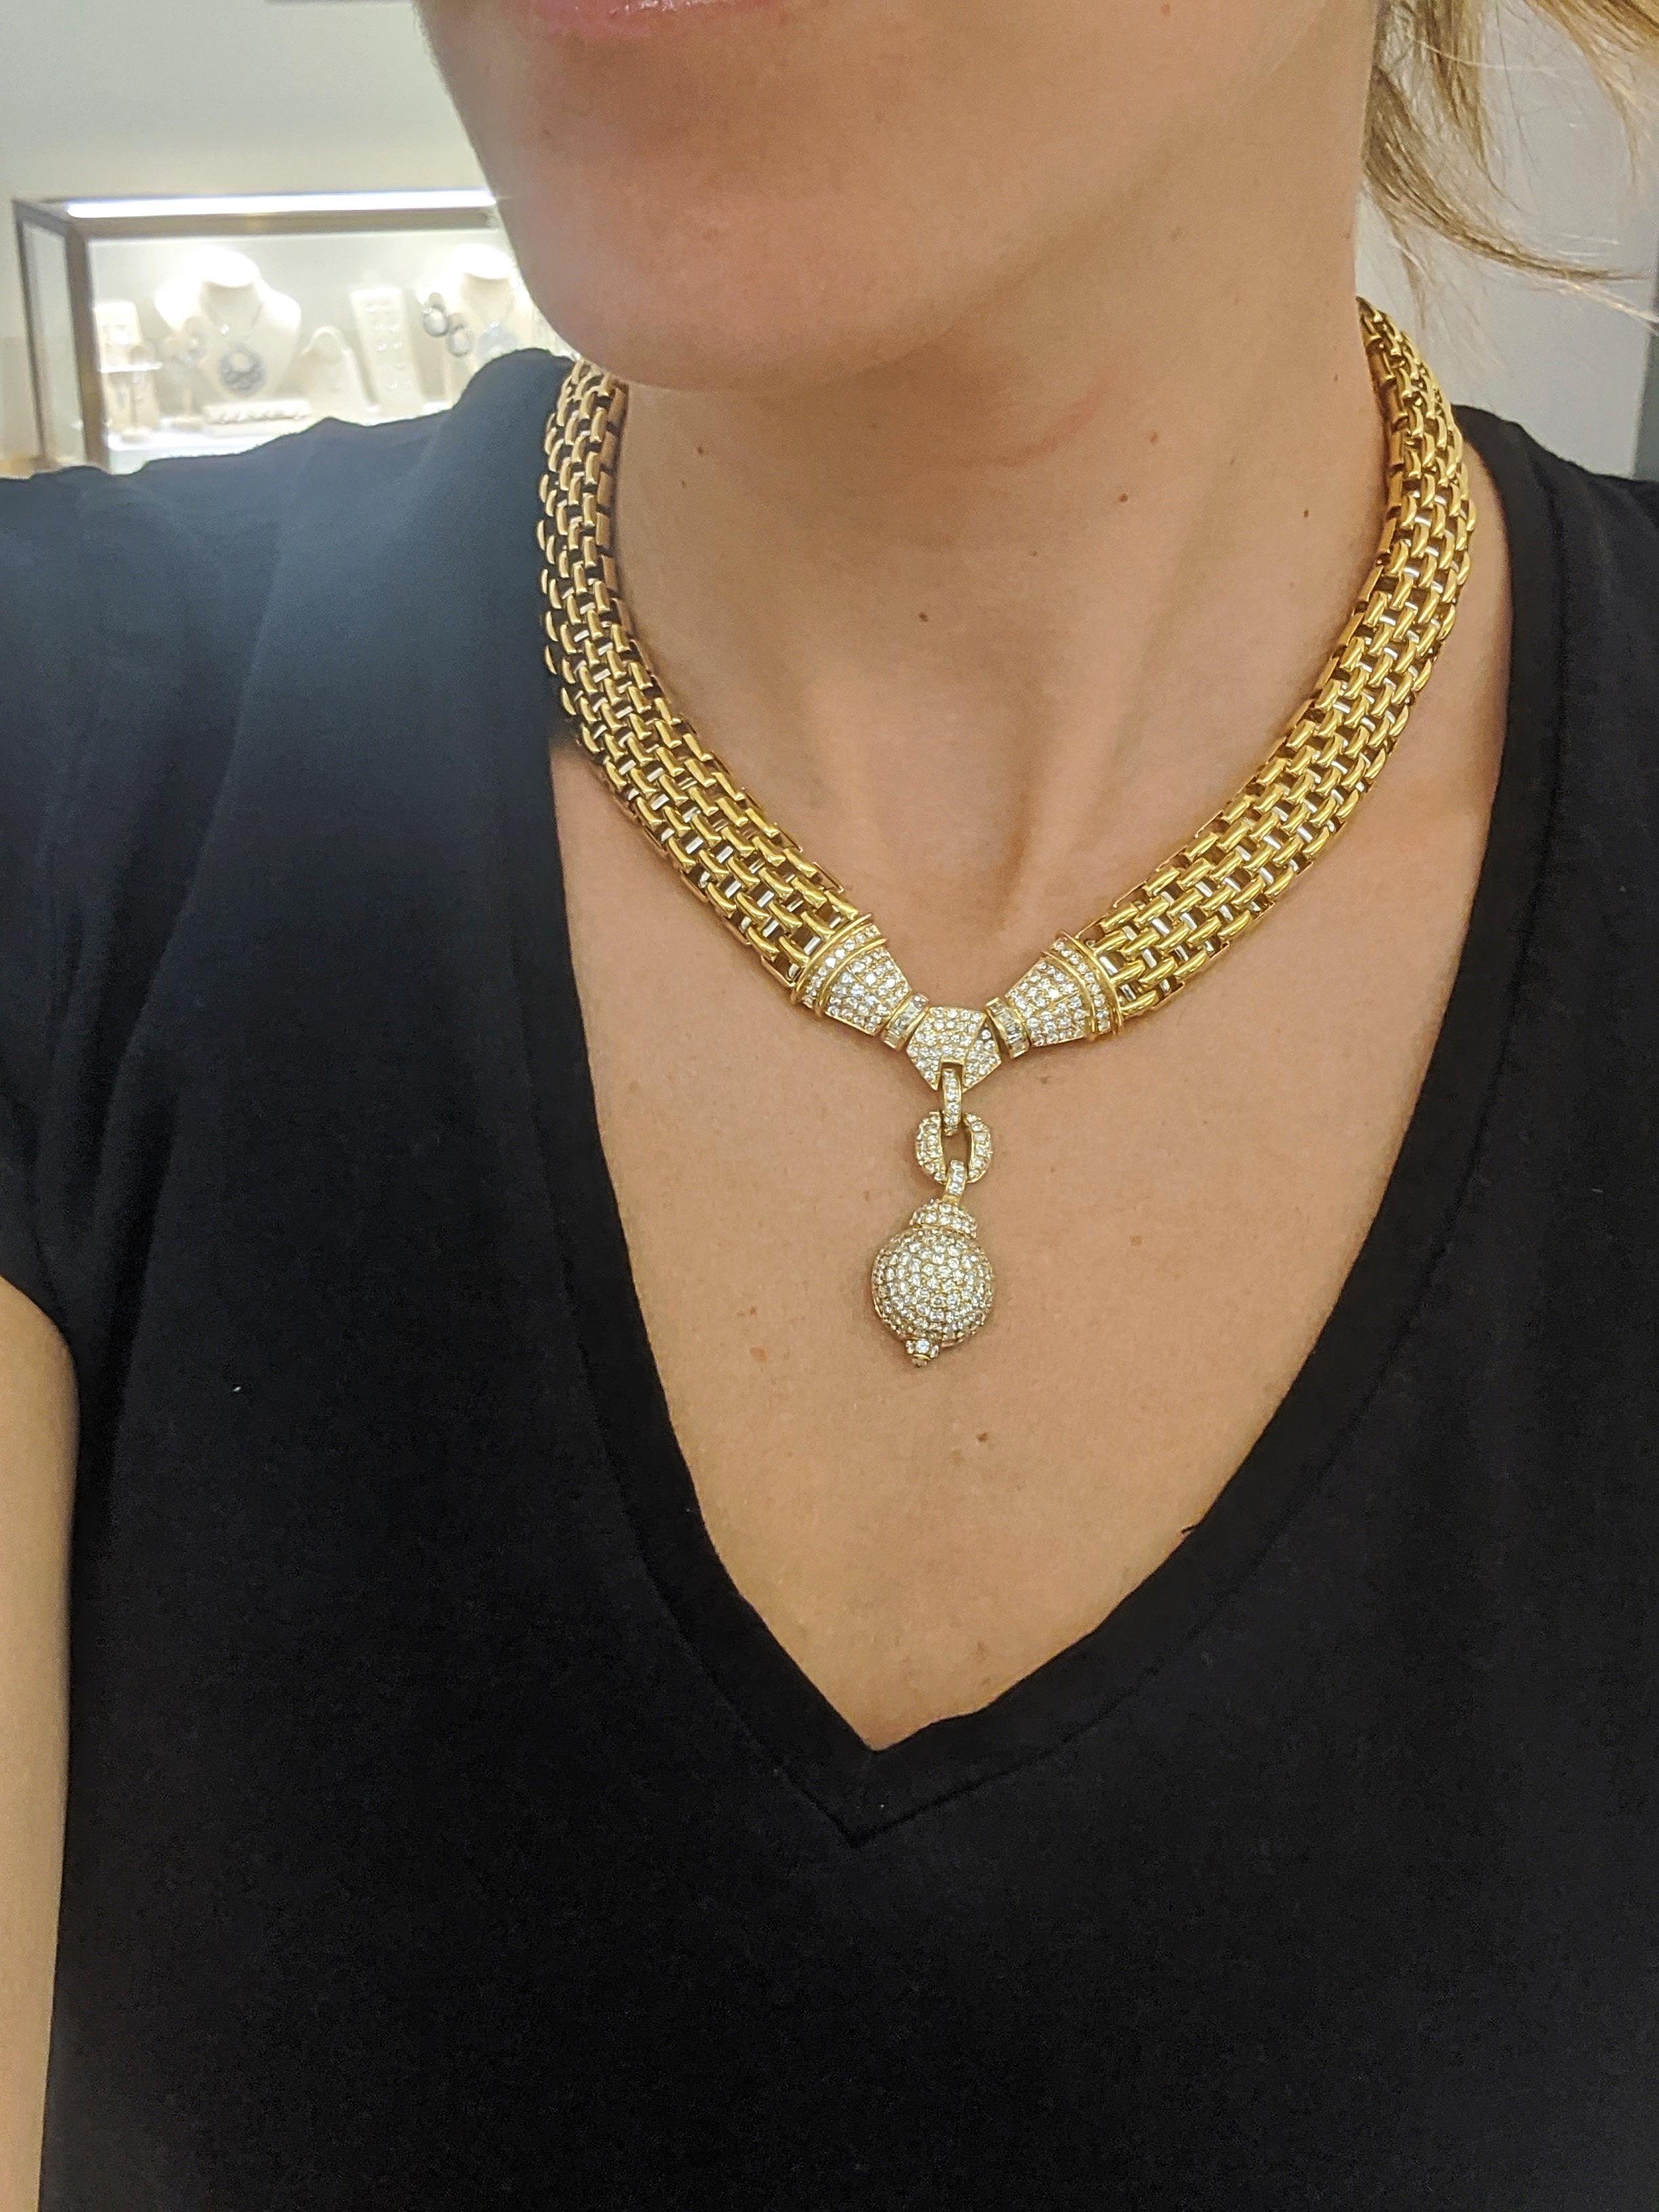 This retro styled necklace is designed with an 18 karat yellow gold link chain. The chain is designed with panthere links that are tubular with a heavy mesh feel. The necklace centers a pave diamond section with a diamond ball drop. Made in Italy by